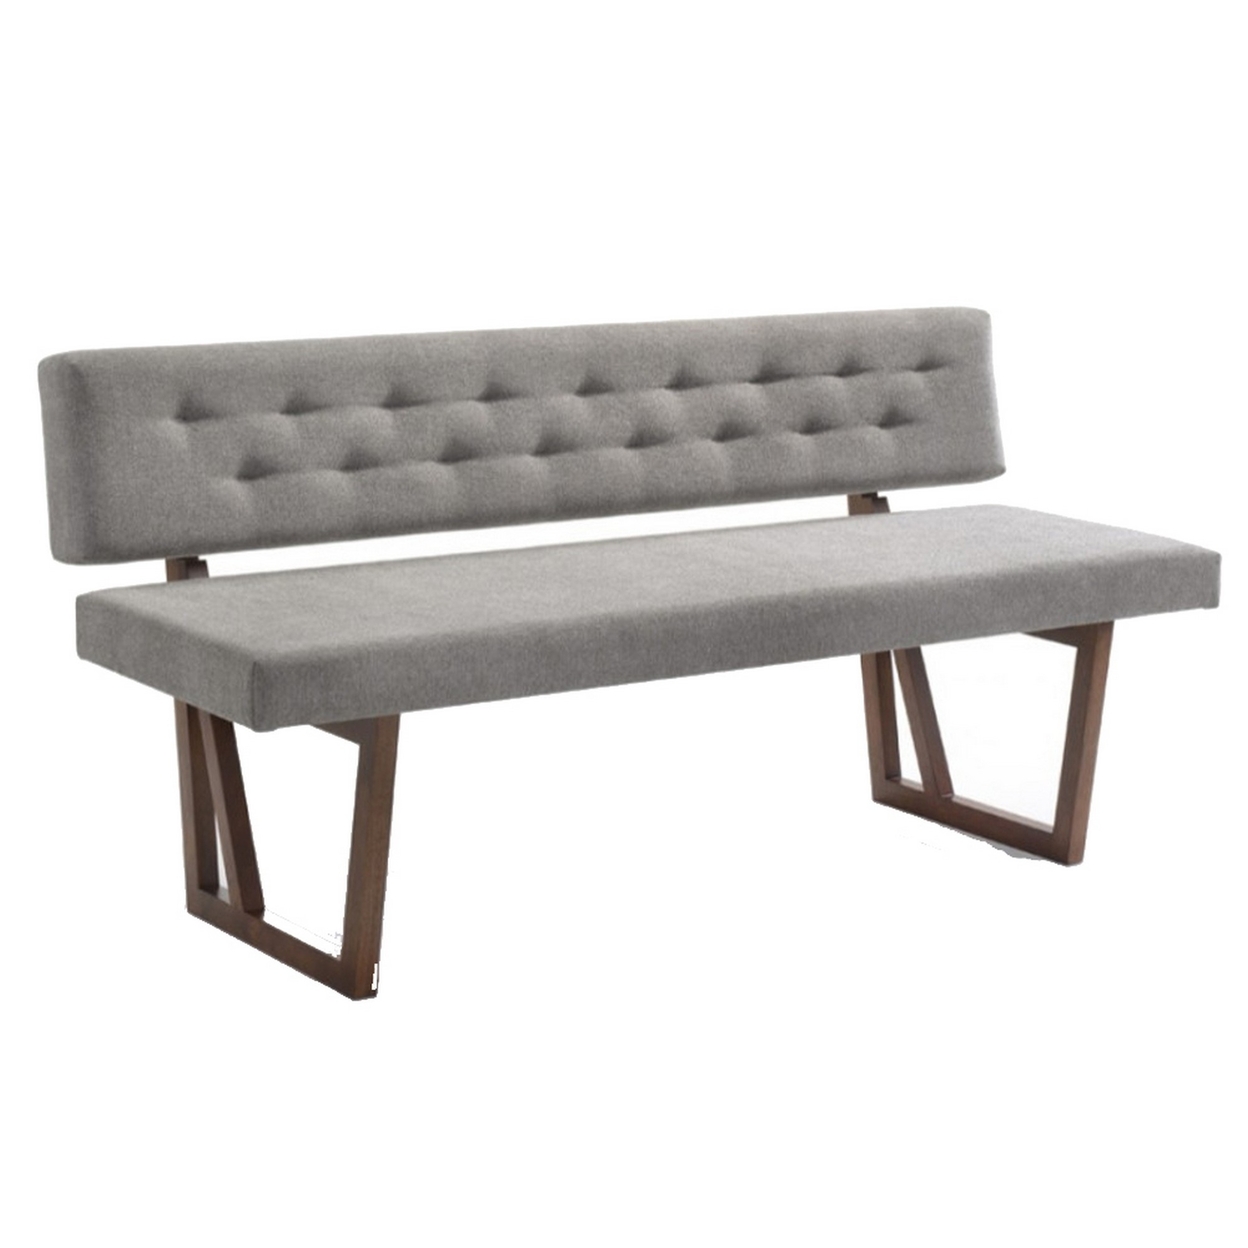 Fabric Upholstered Dining Bench With Rubber Wood Feet, Gray And Walnut Brown- Saltoro Sherpi